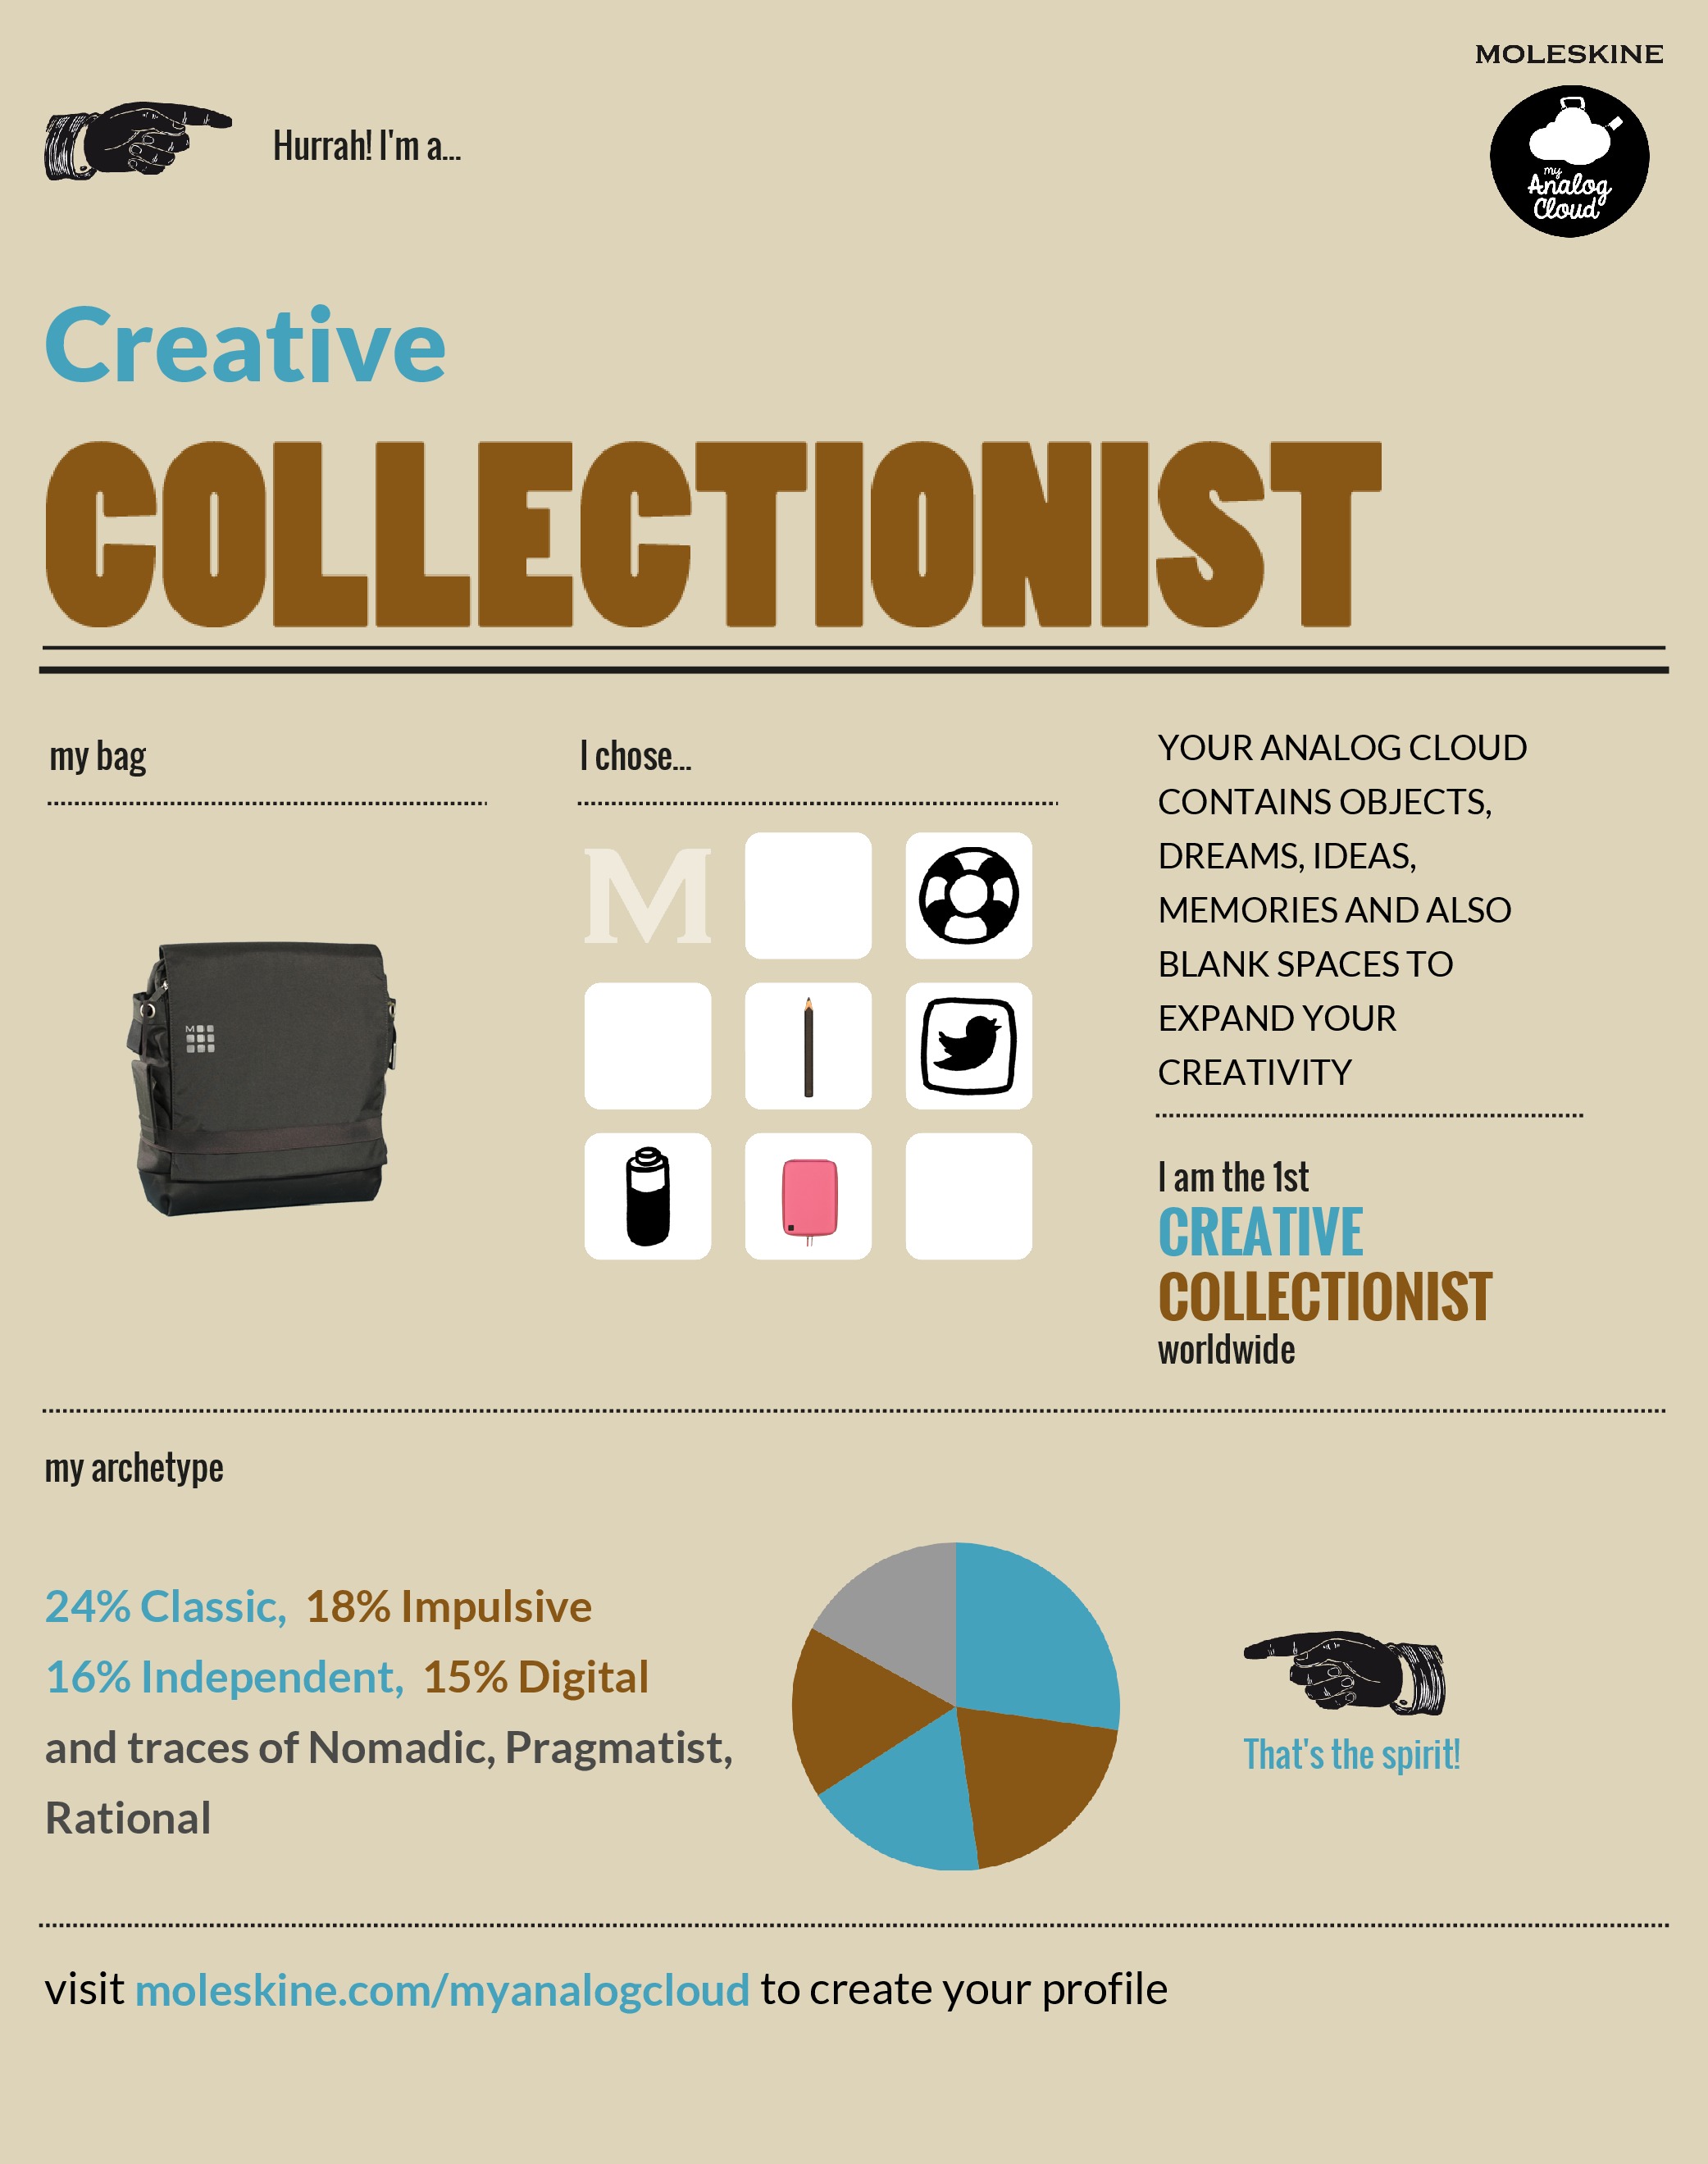 1. Creative collectionist